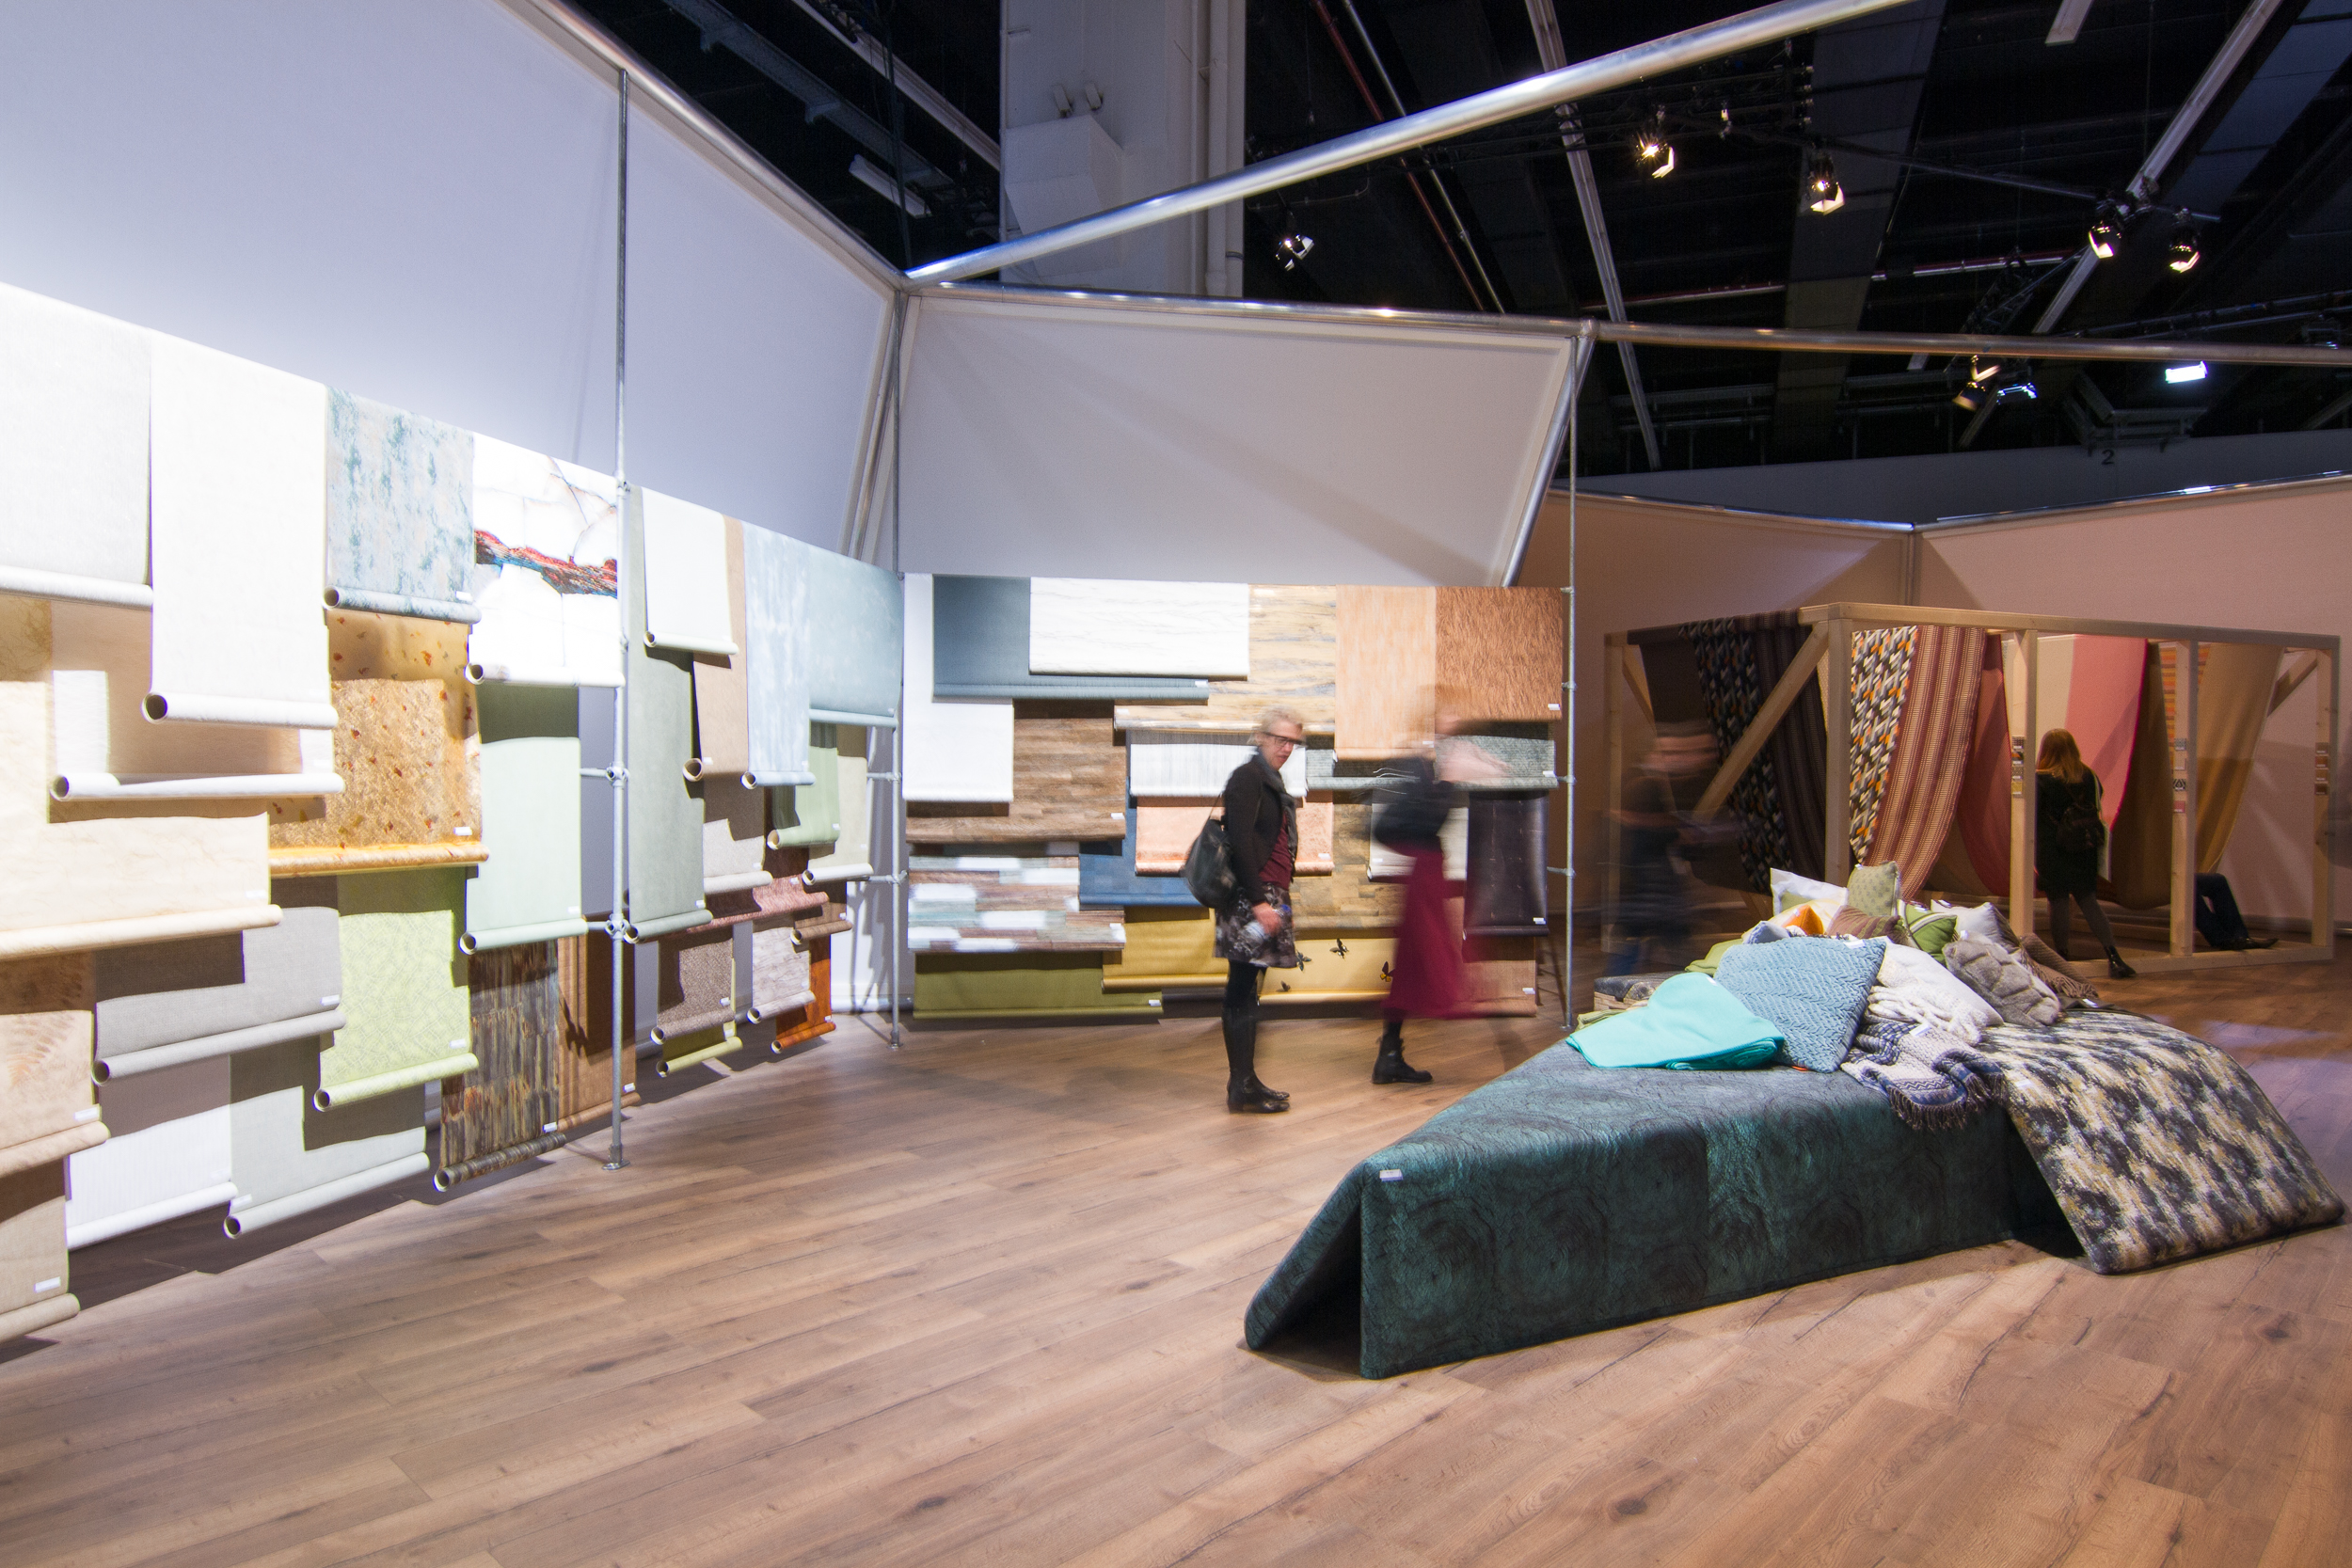  "Work &amp; Home"&nbsp; -&nbsp; Heimtextil's Theme Park is organized into different experiential areas based on the trend forecasters' vision.&nbsp; 